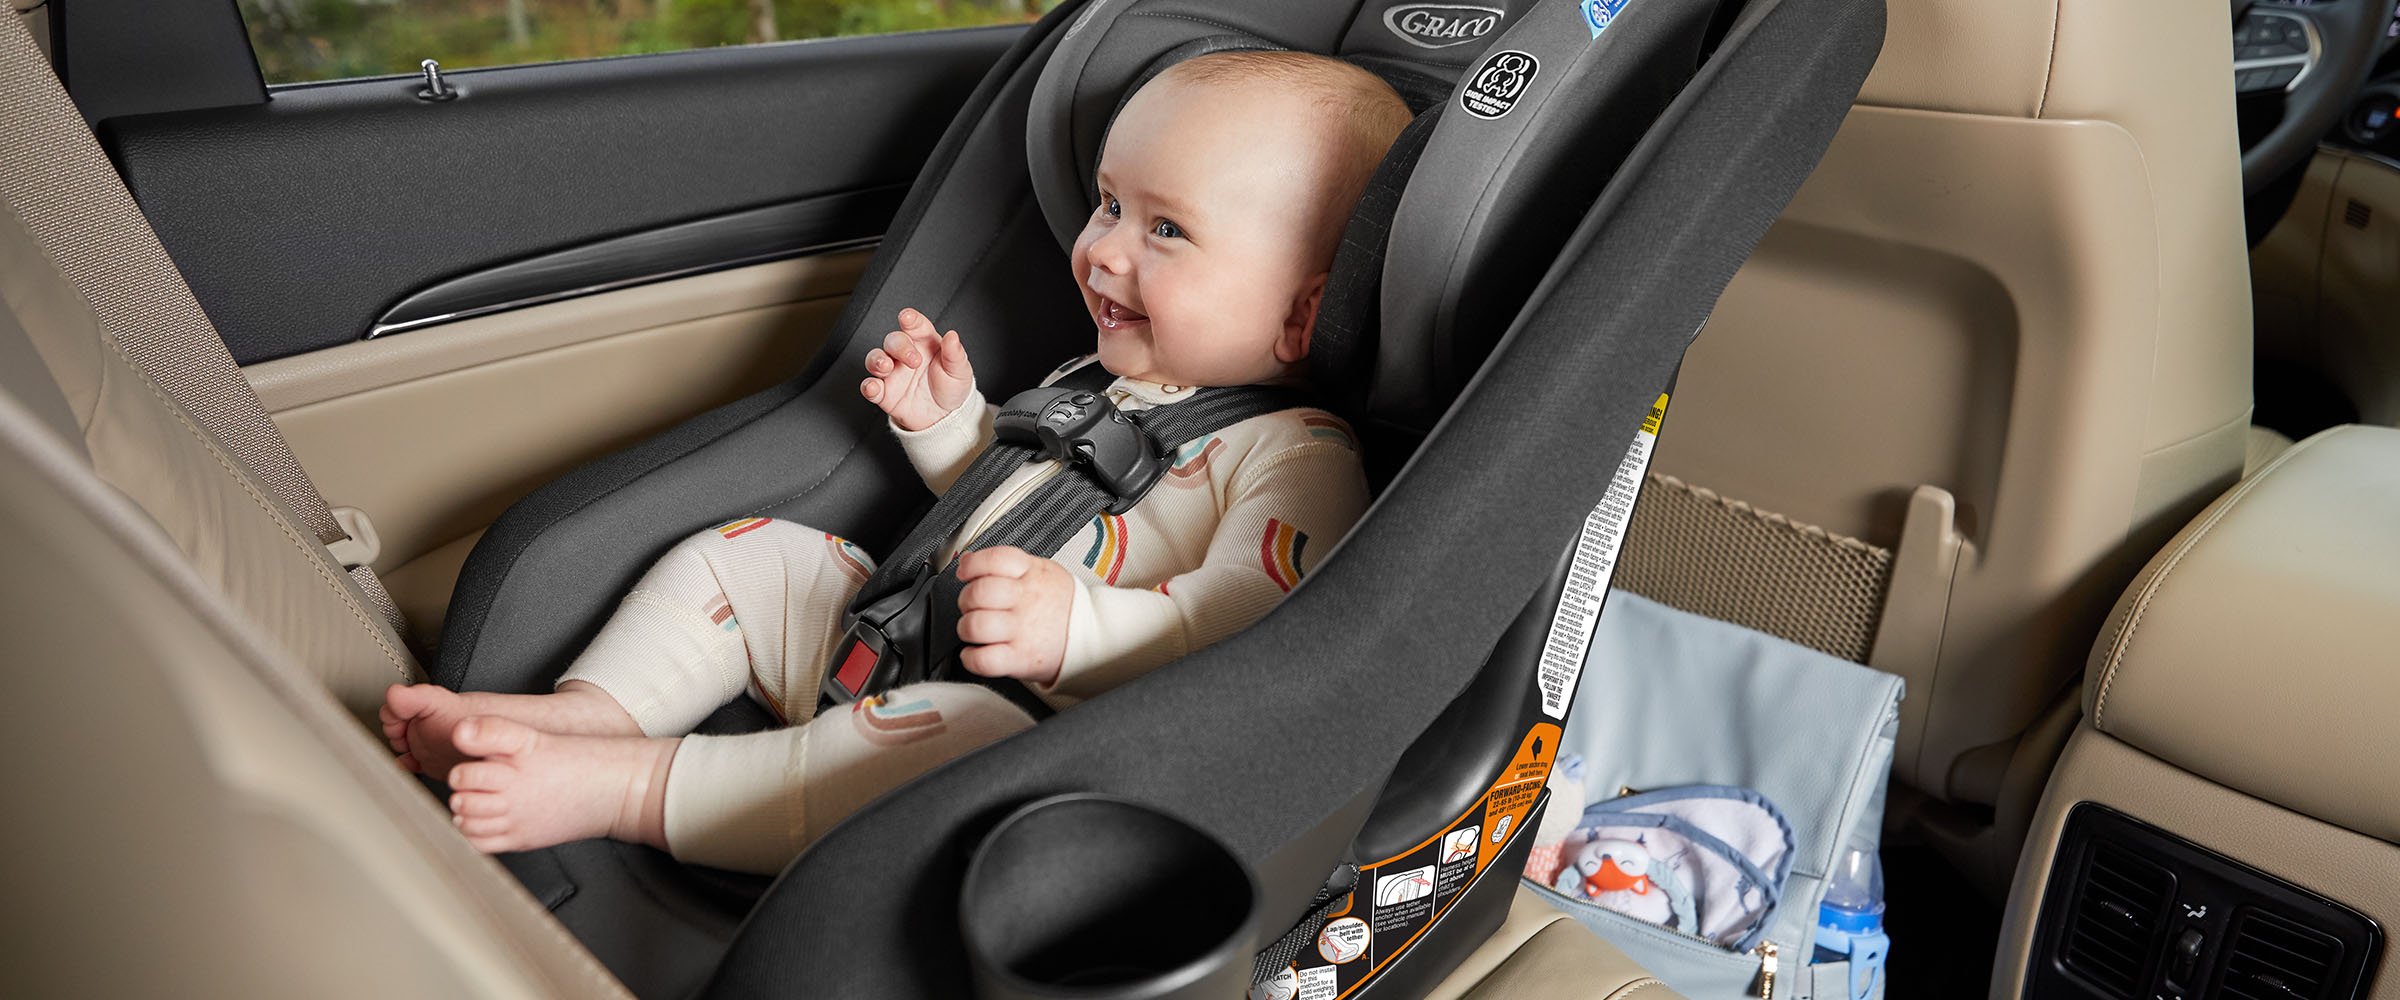 Graco Car Seat Buying Guide | Graco Baby